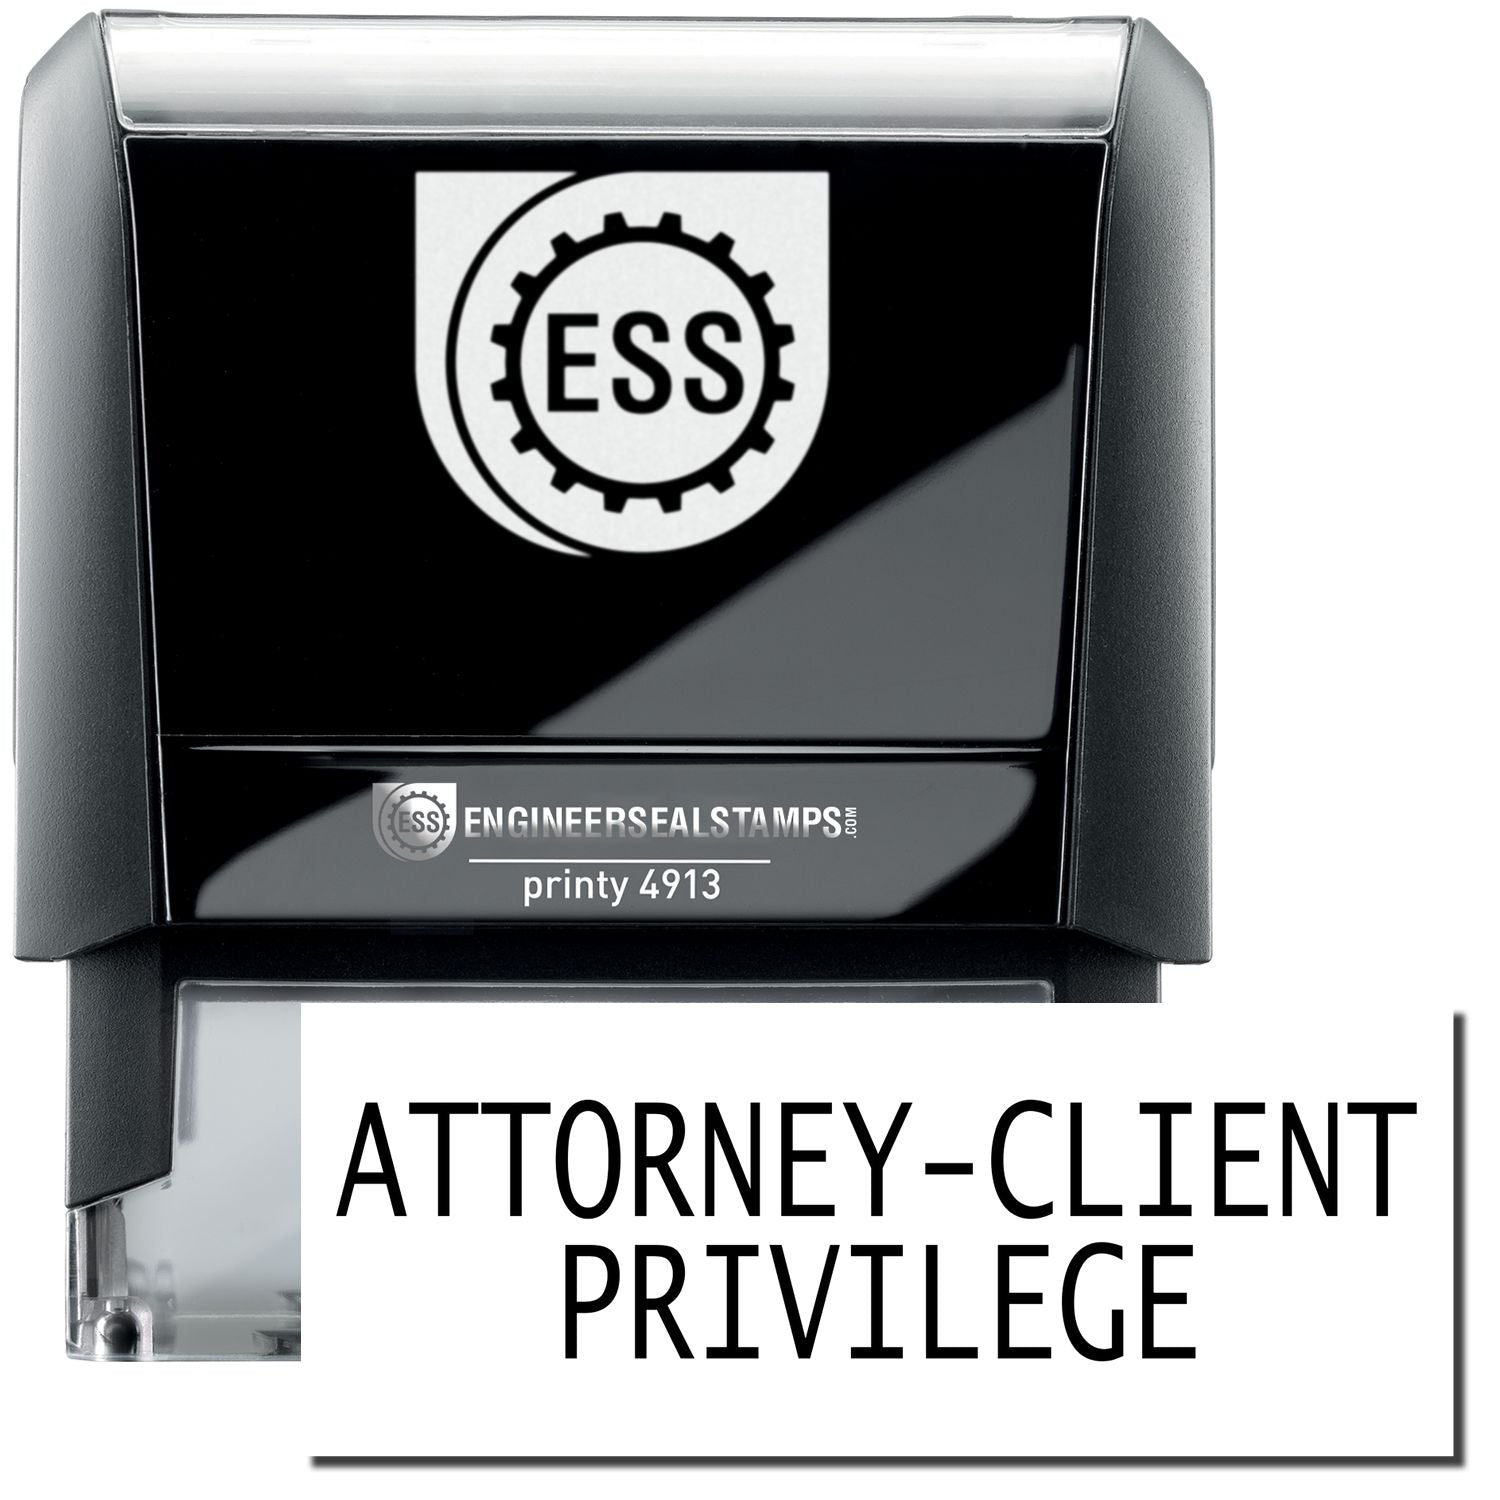 A self-inking stamp with a stamped image showing how the text "ATTORNEY-CLIENT PRIVILEGE" in a large bold font is displayed by it.